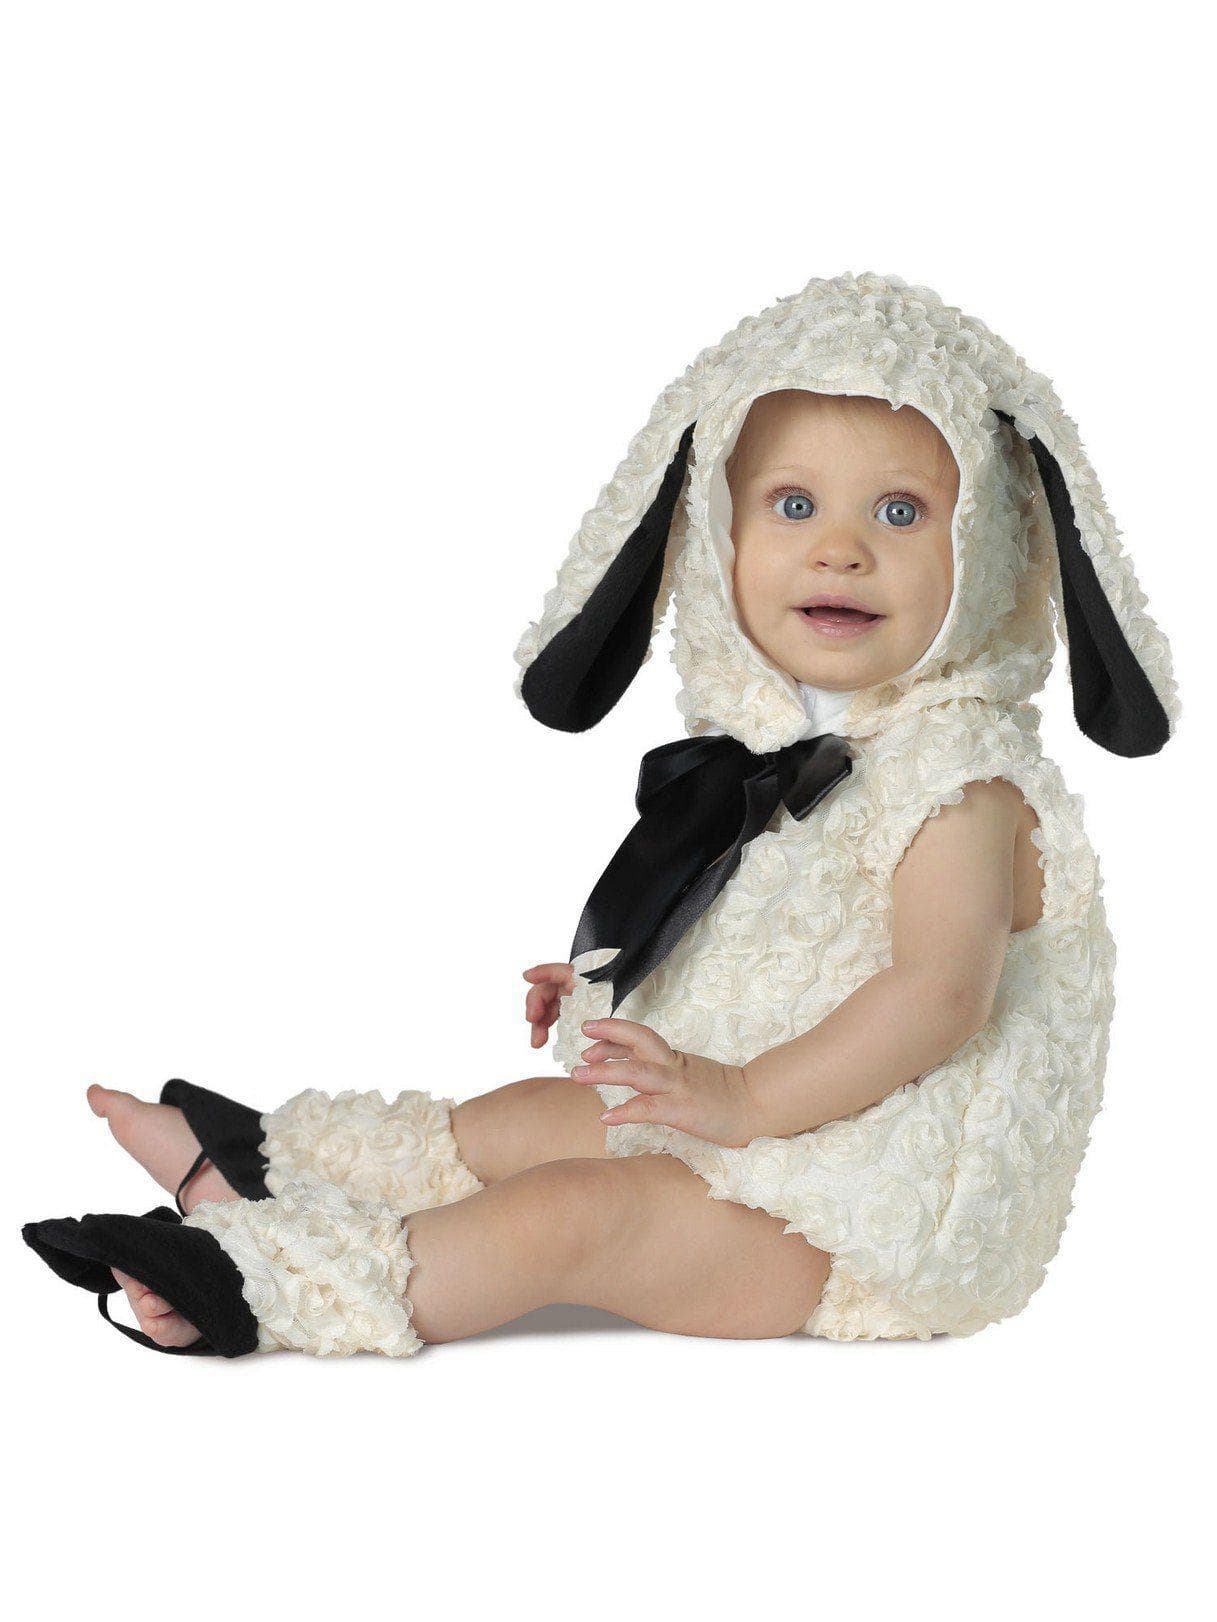 Baby/Toddler Vintage Lamb Costume - costumes.com